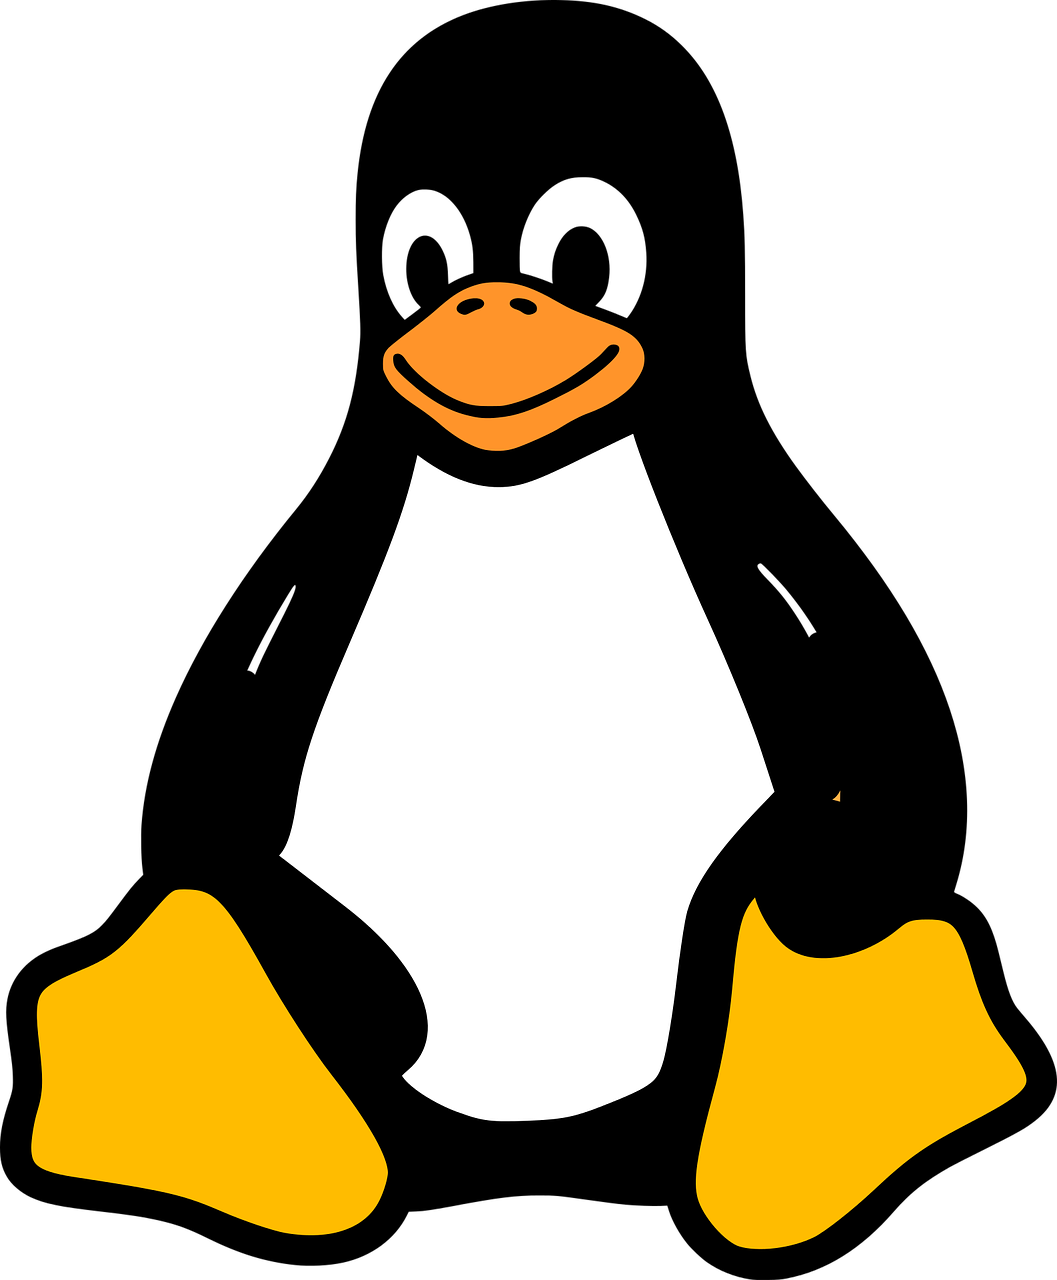 a close up of a penguin's face on a black background, inspired by Jacob Duck, reddit, computer art, simple and clean illustration, 2 0 0 0's photo, orange body, seen from below